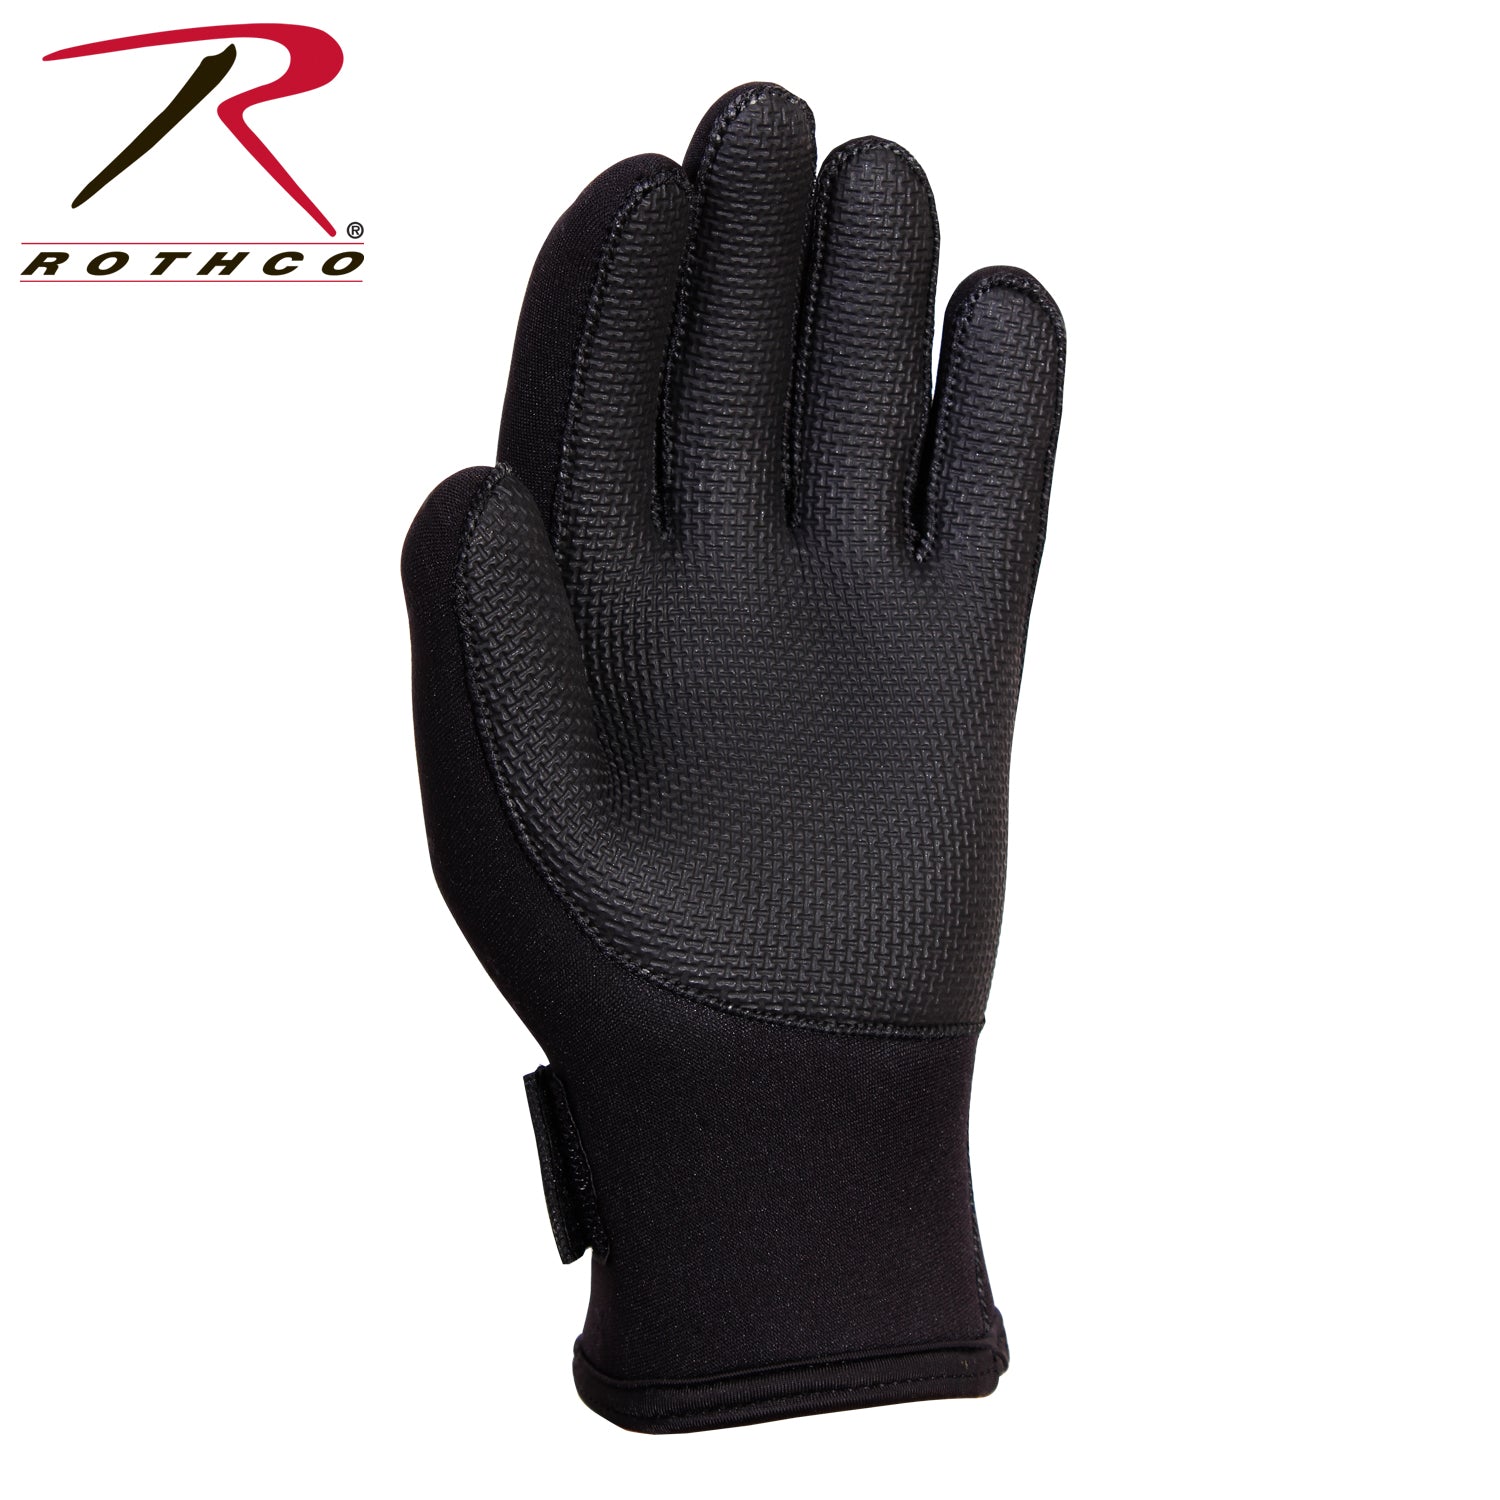 Rothco Waterproof Cold Weather Neoprene Gloves - Tactical Choice Plus